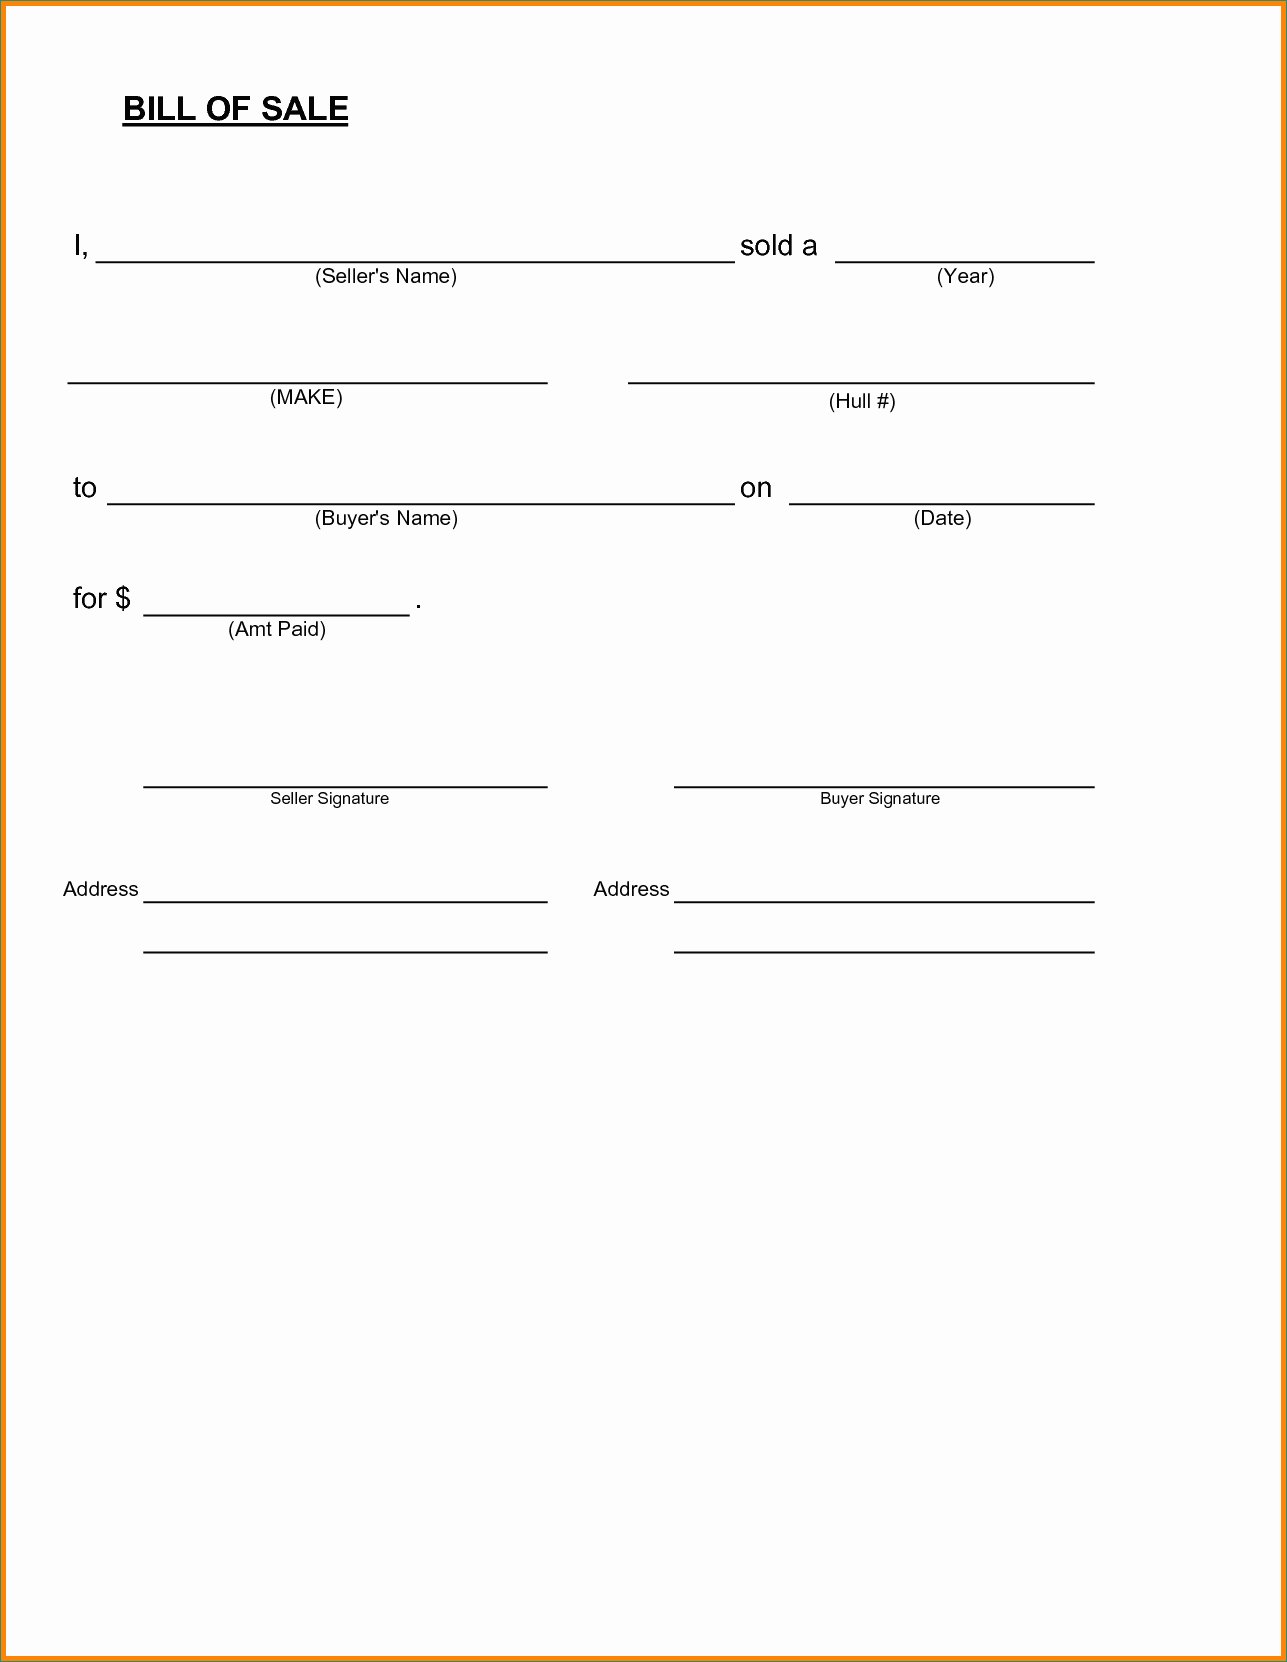 Sample Blank Printable Bill of Sale For Boat In PDF & Word Bill of